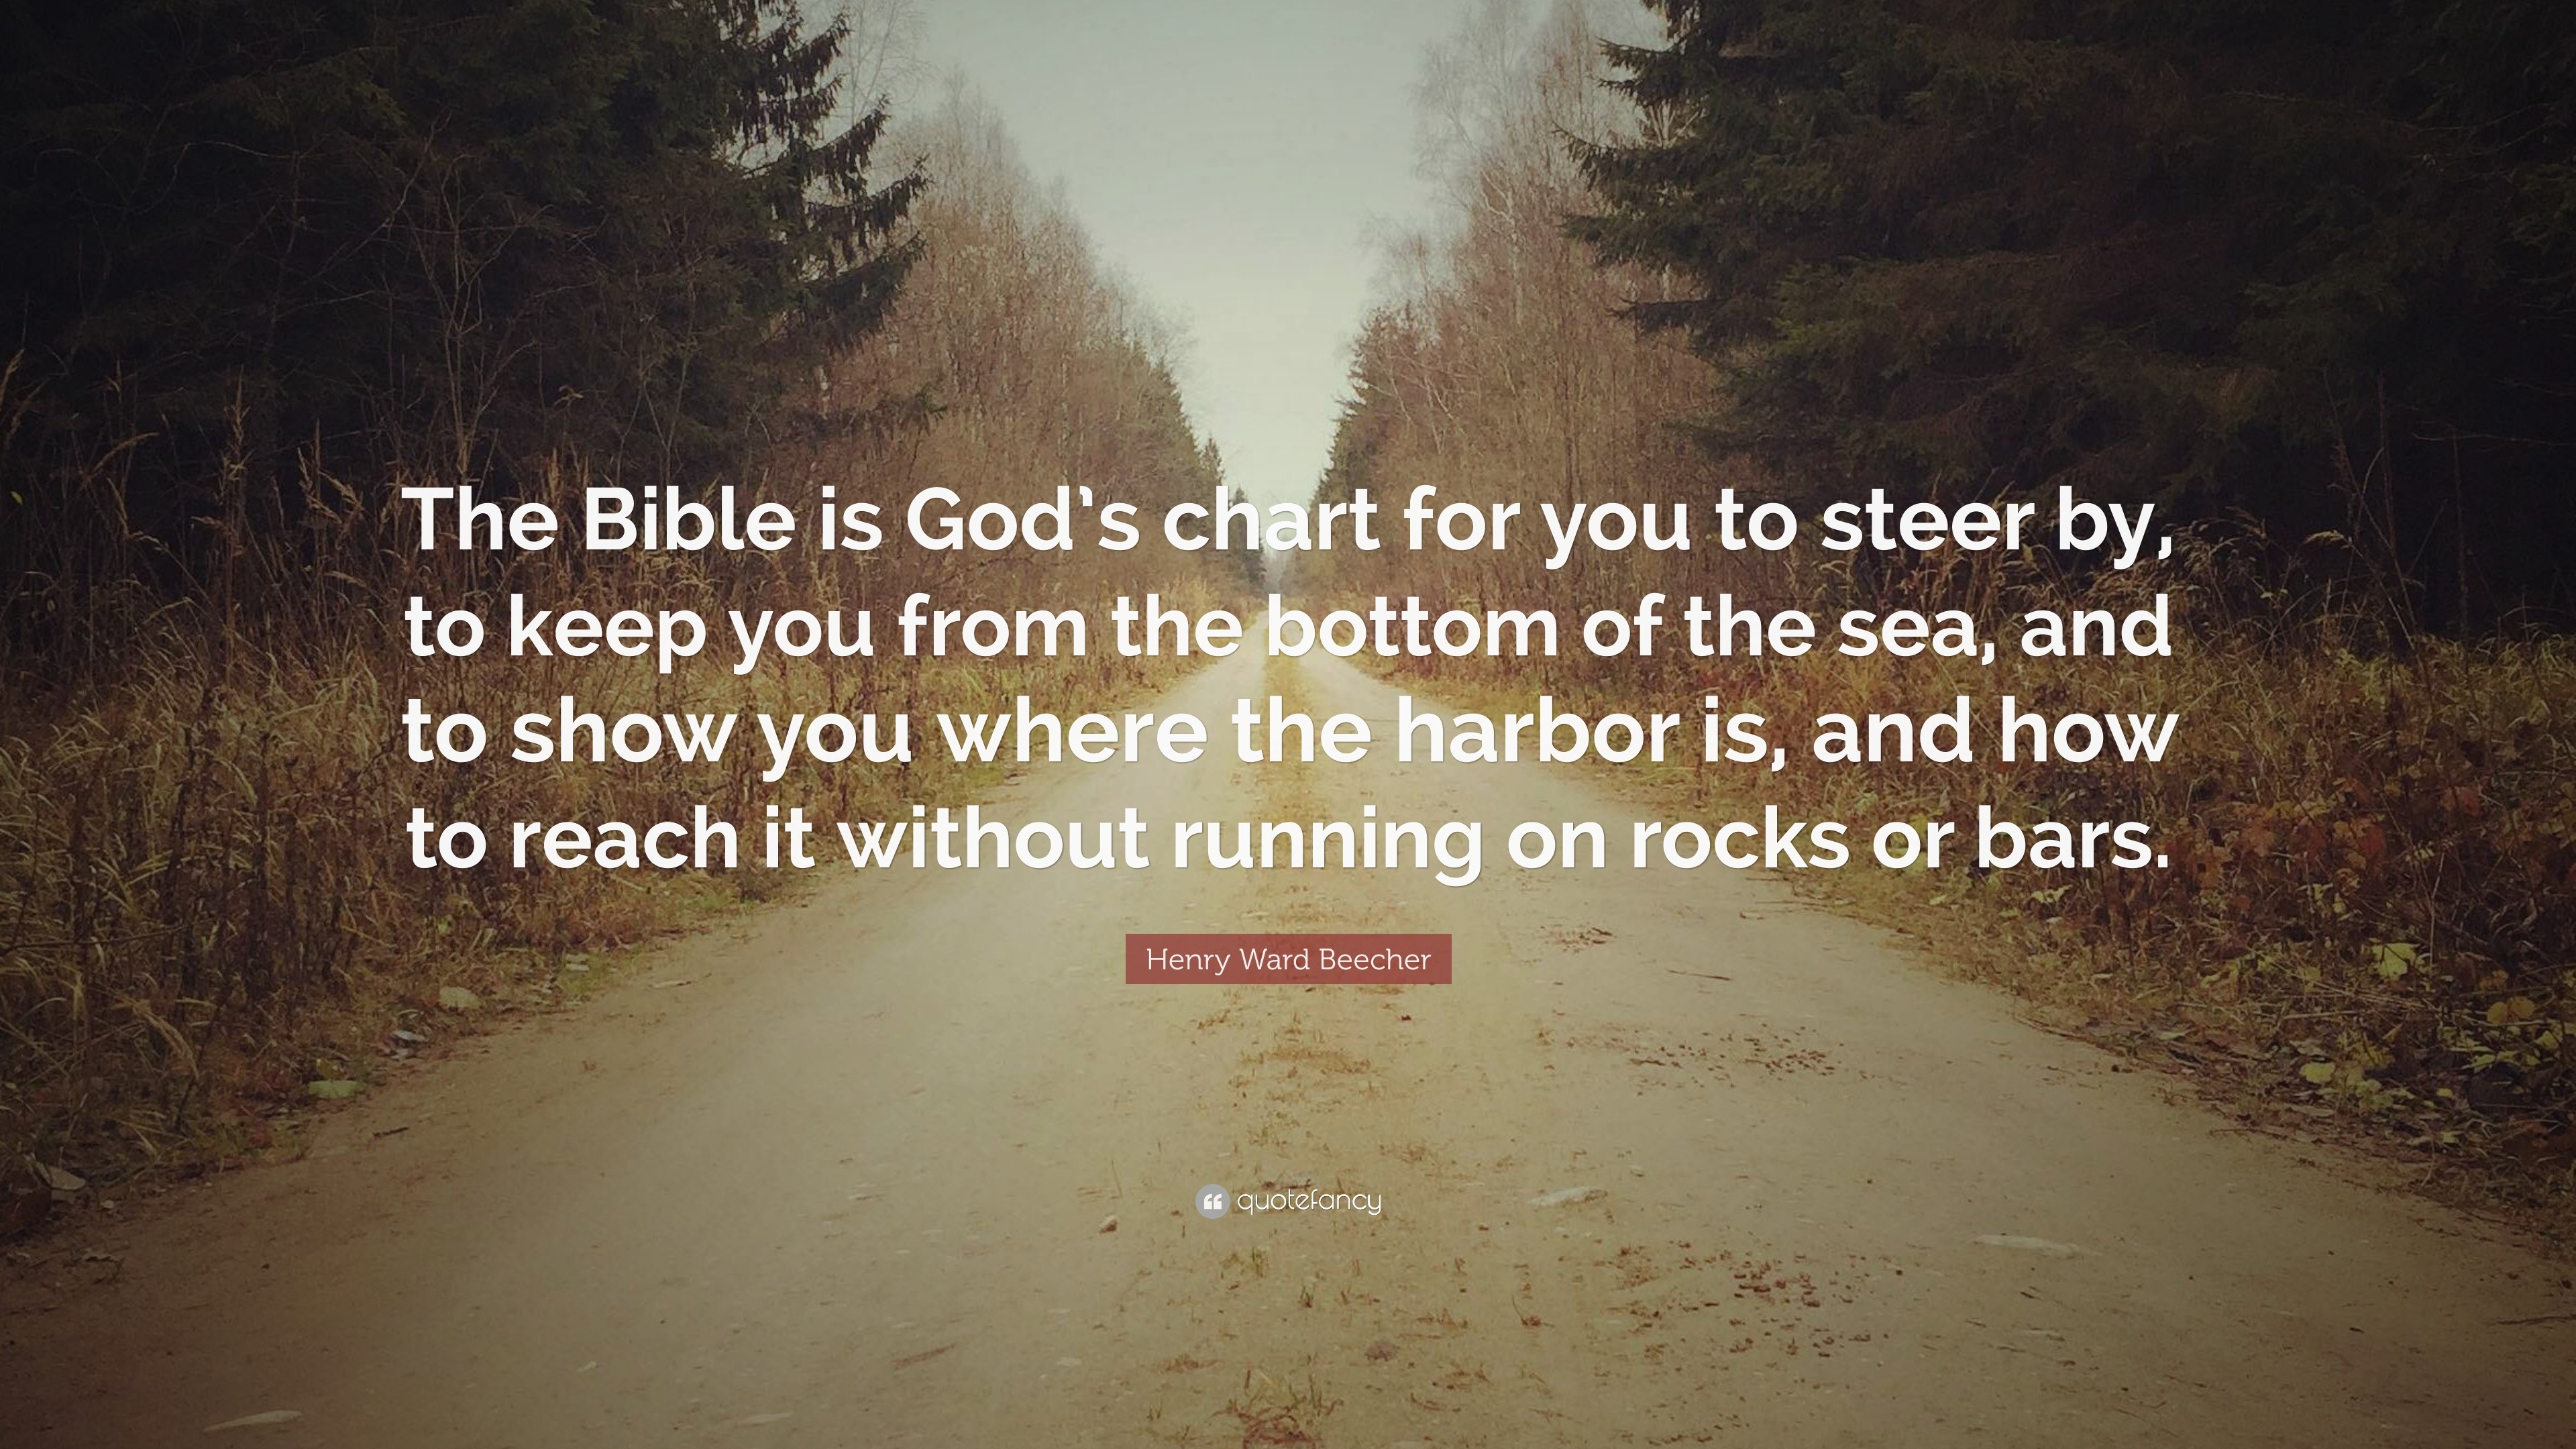 Henry Ward Beecher Quote: “The Bible is God’s chart for you to steer by ...